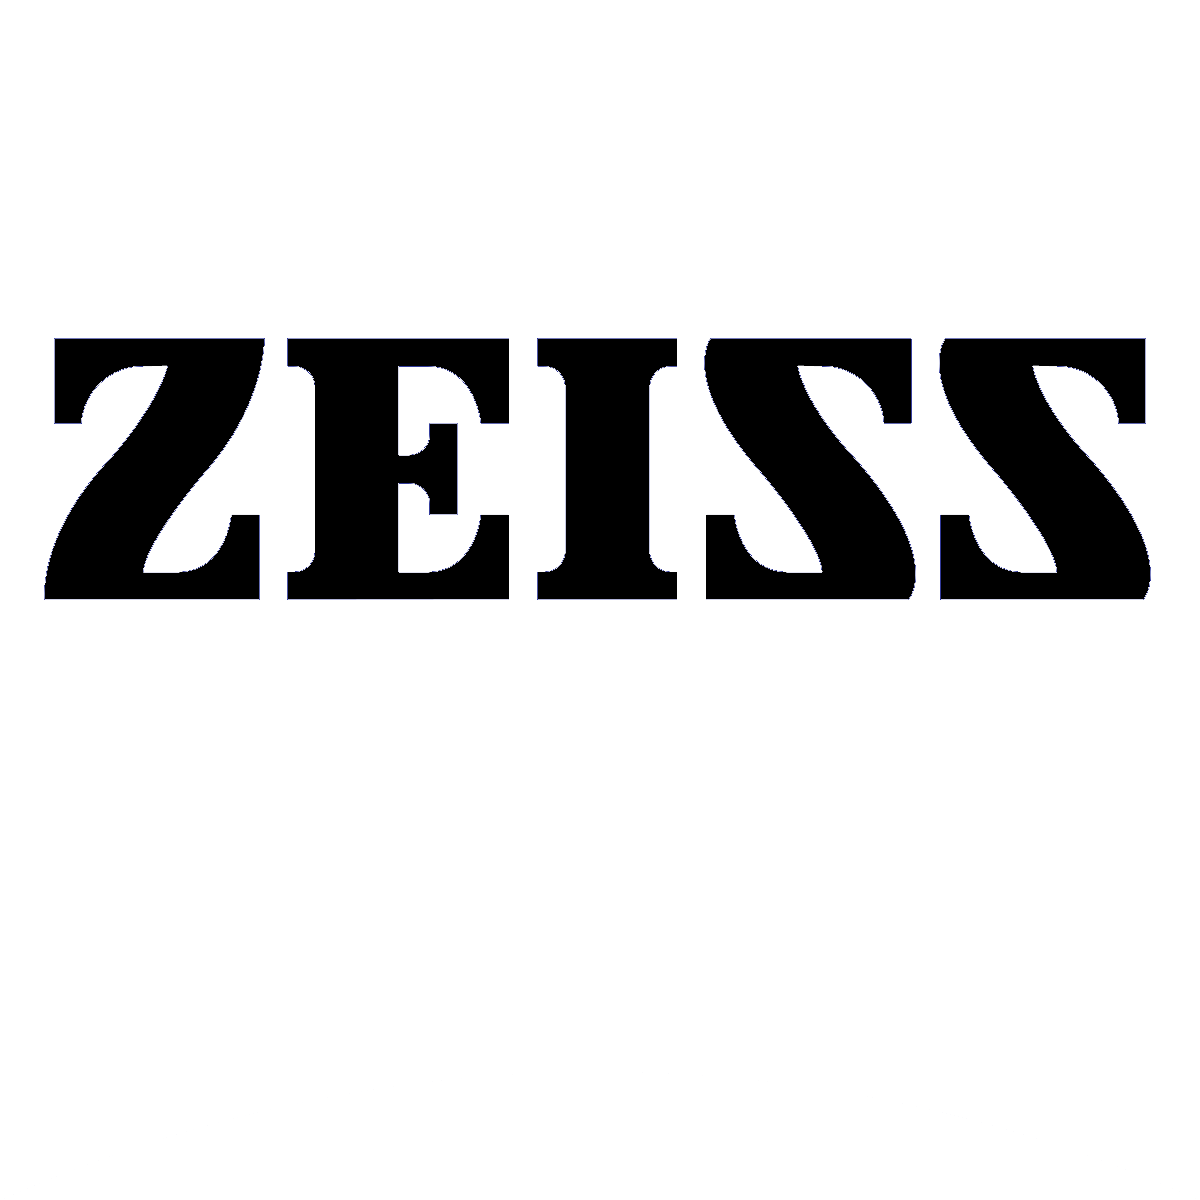 Zeiss_logo.svg_b&w.png